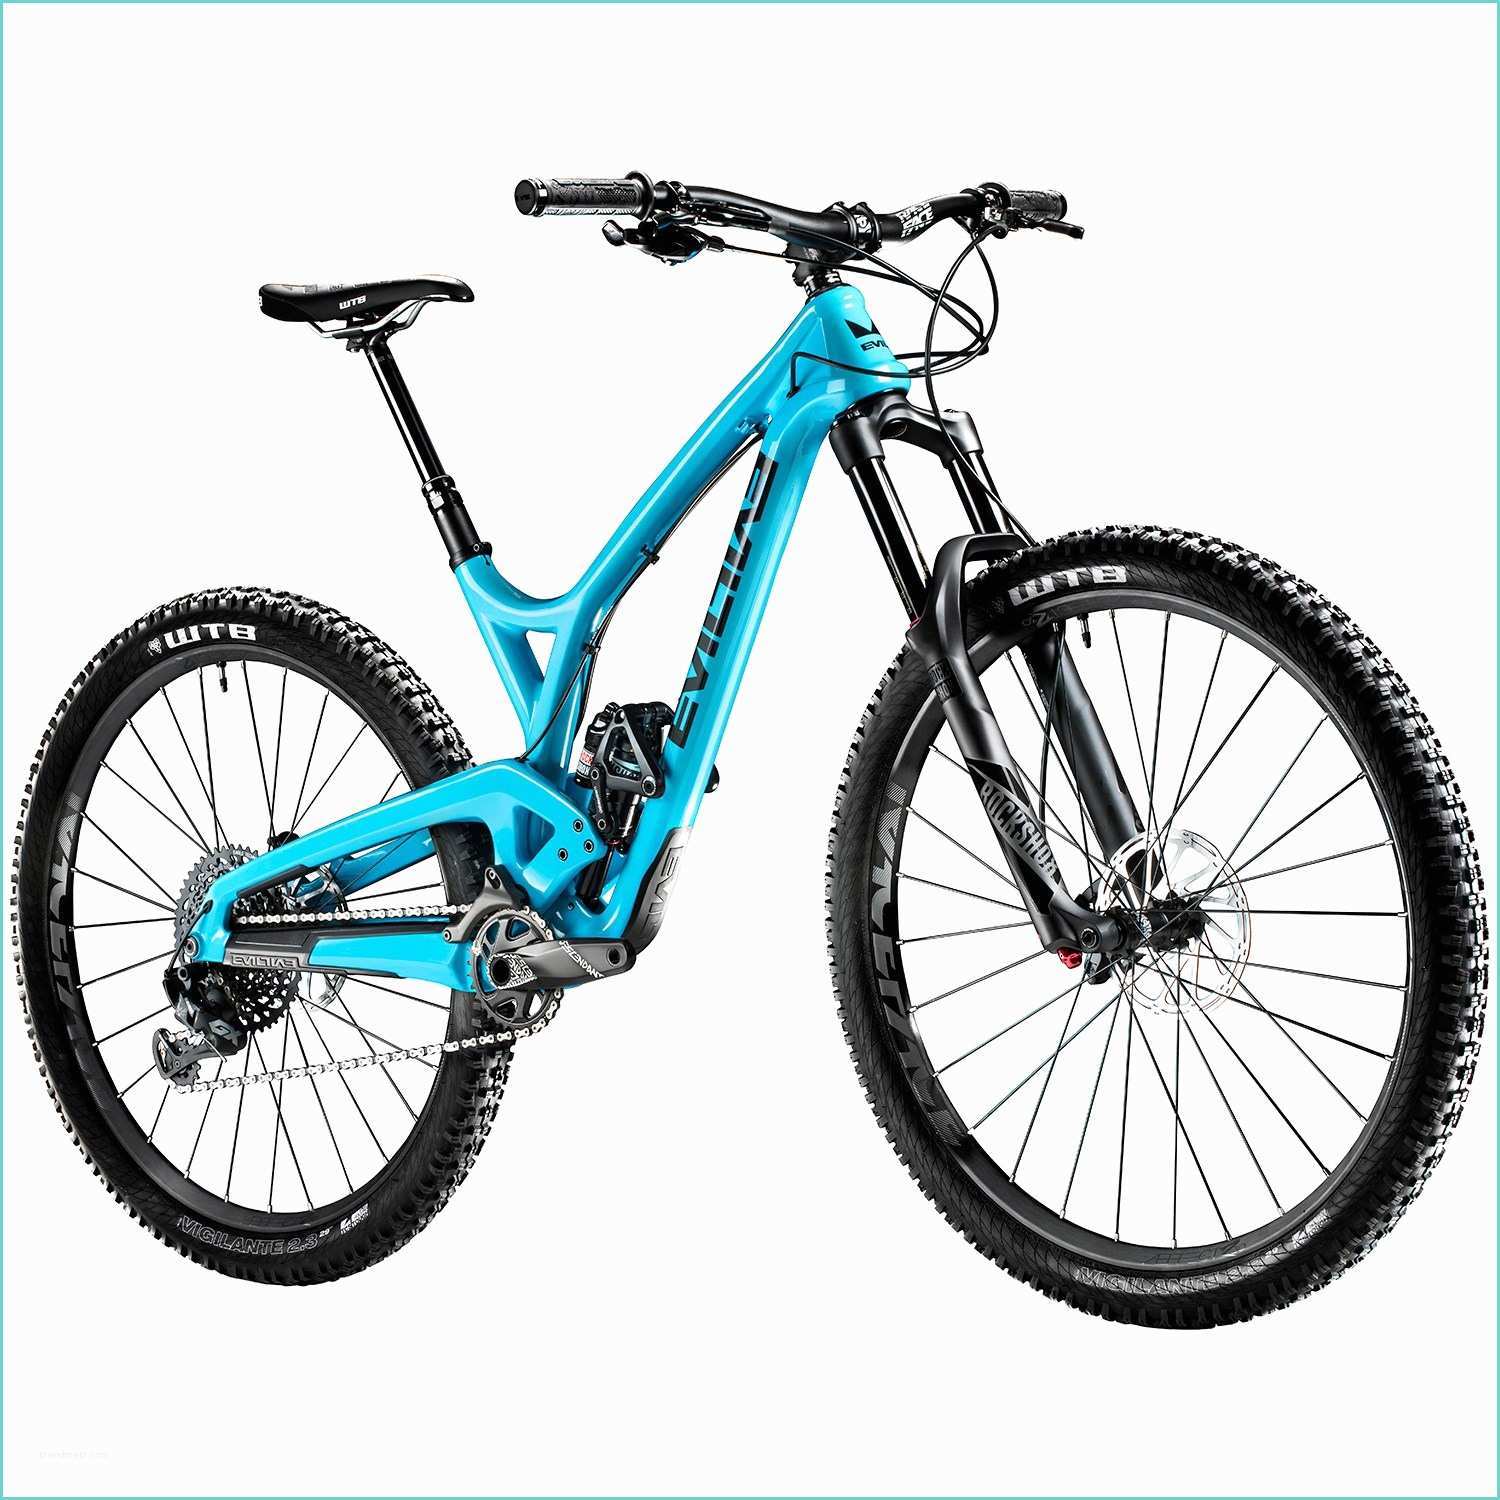 Best Radium Designs for Bikes Mountain Bikes Bicycling and the Best Bike Ideas